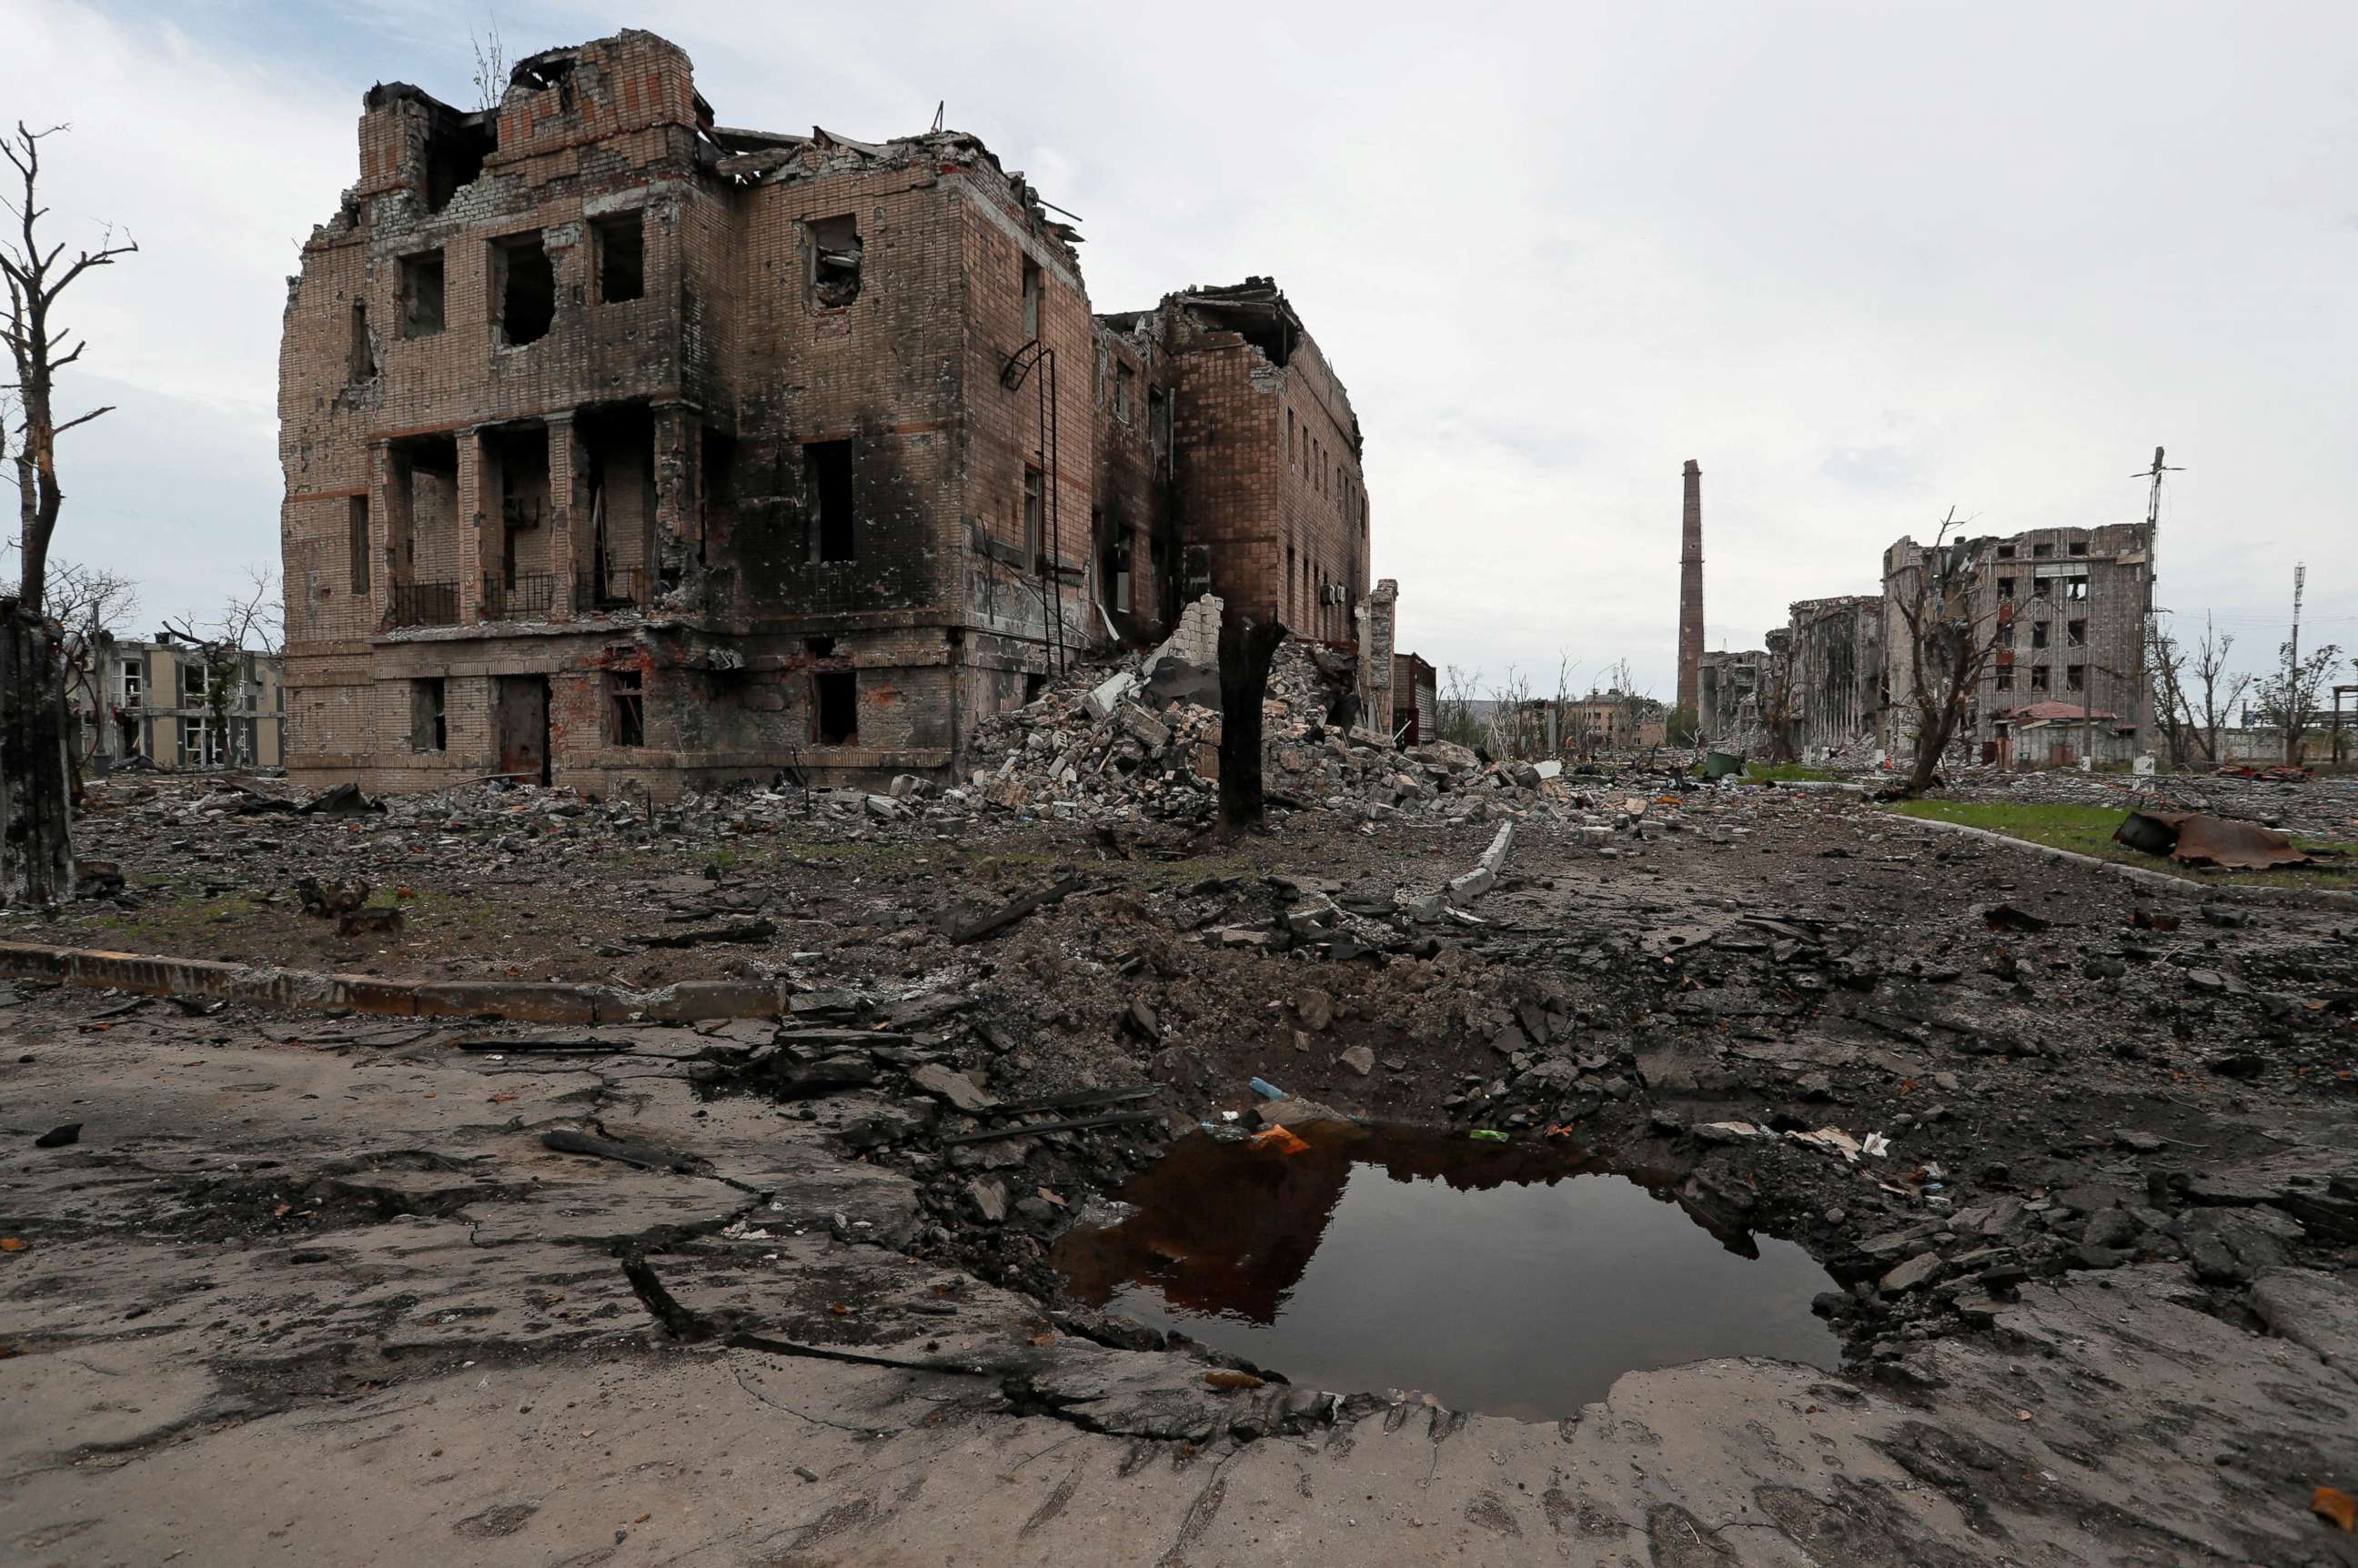 PHOTO: A view shows destroyed facilities of Azovstal steel plant during Ukraine-Russia conflict in the southern port city of Mariupol, Ukraine May 22, 2022.